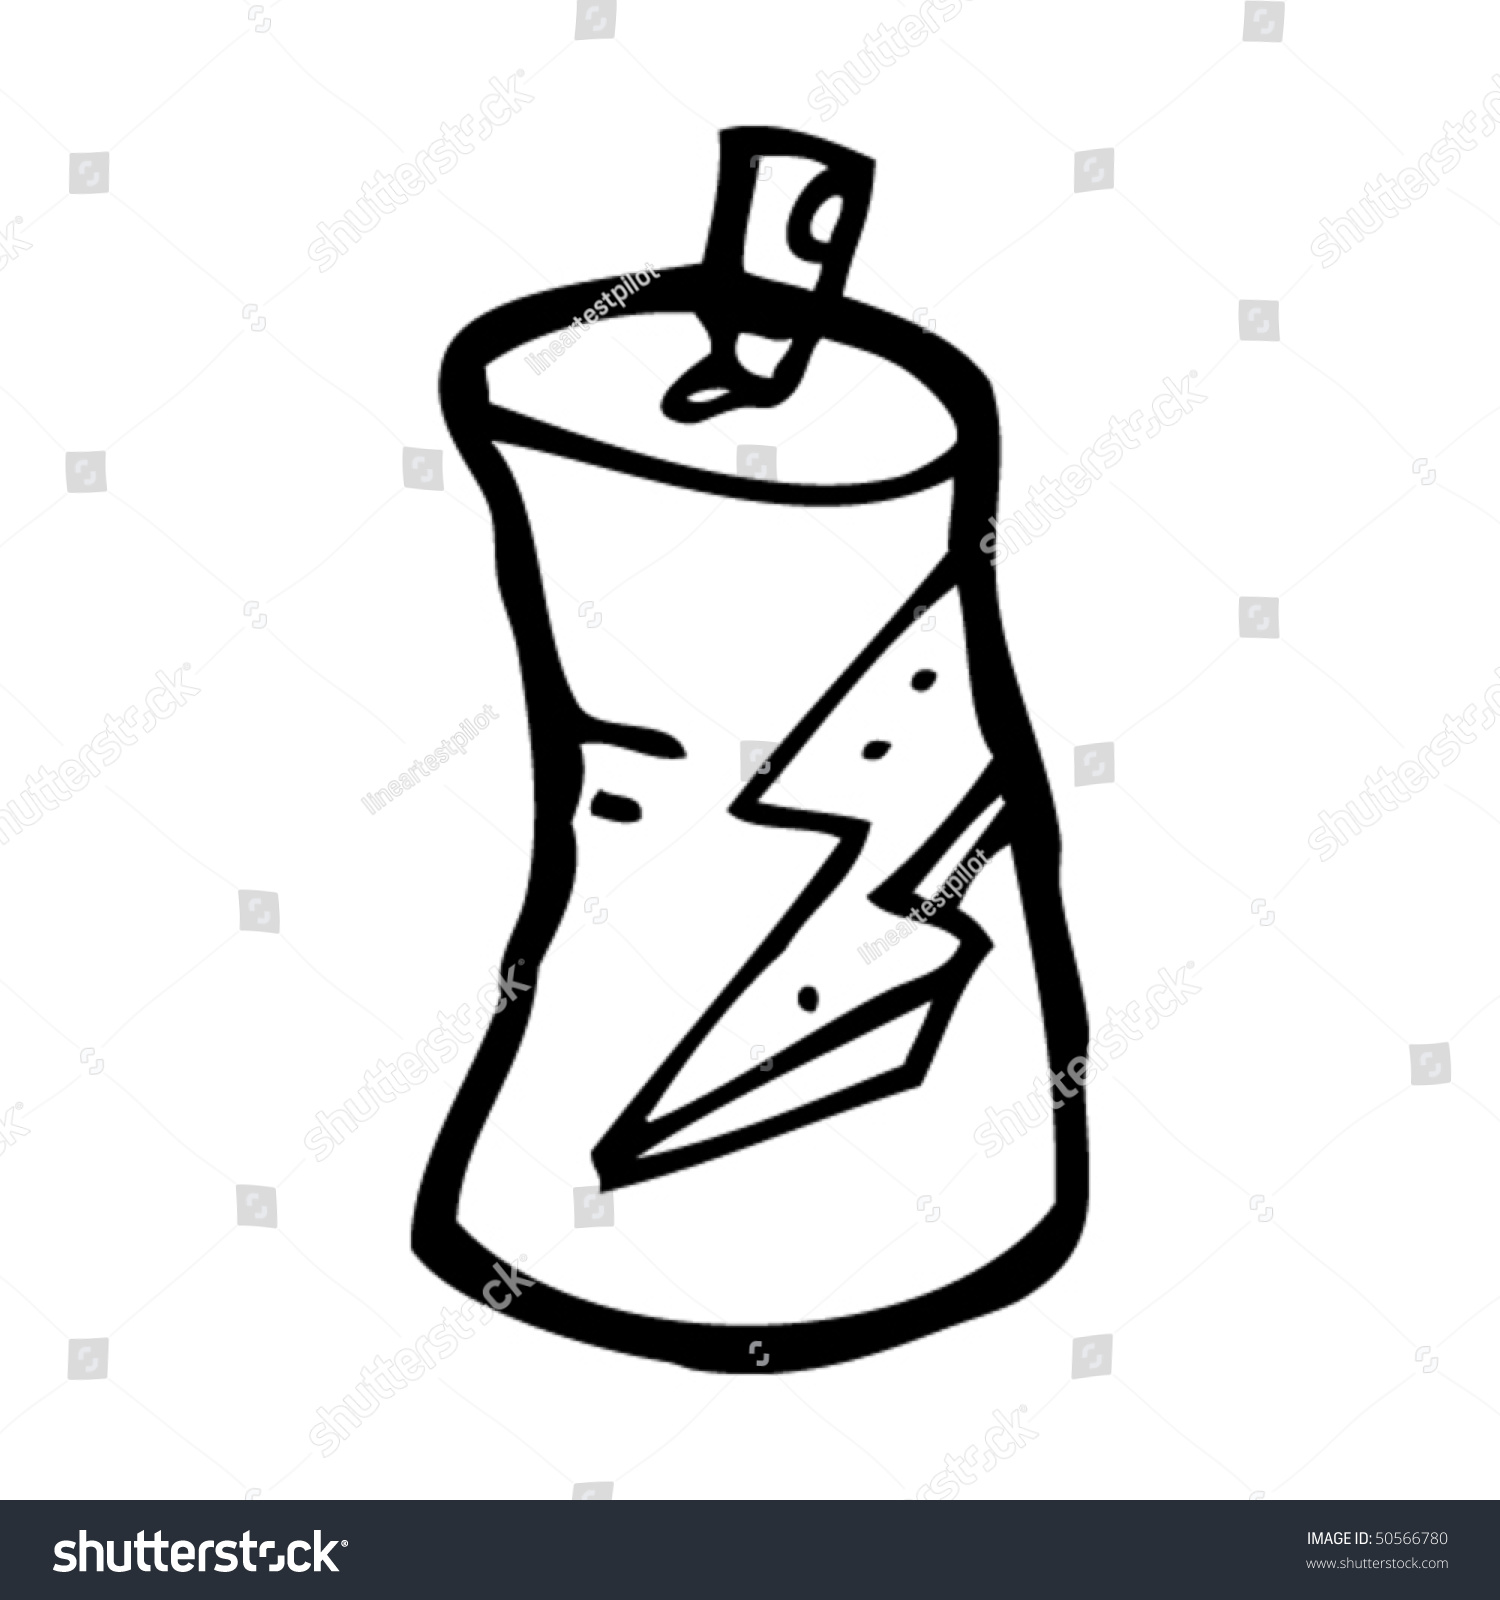 Quirky Drawing Of A Spray Can Stock Vector Illustration 50566780